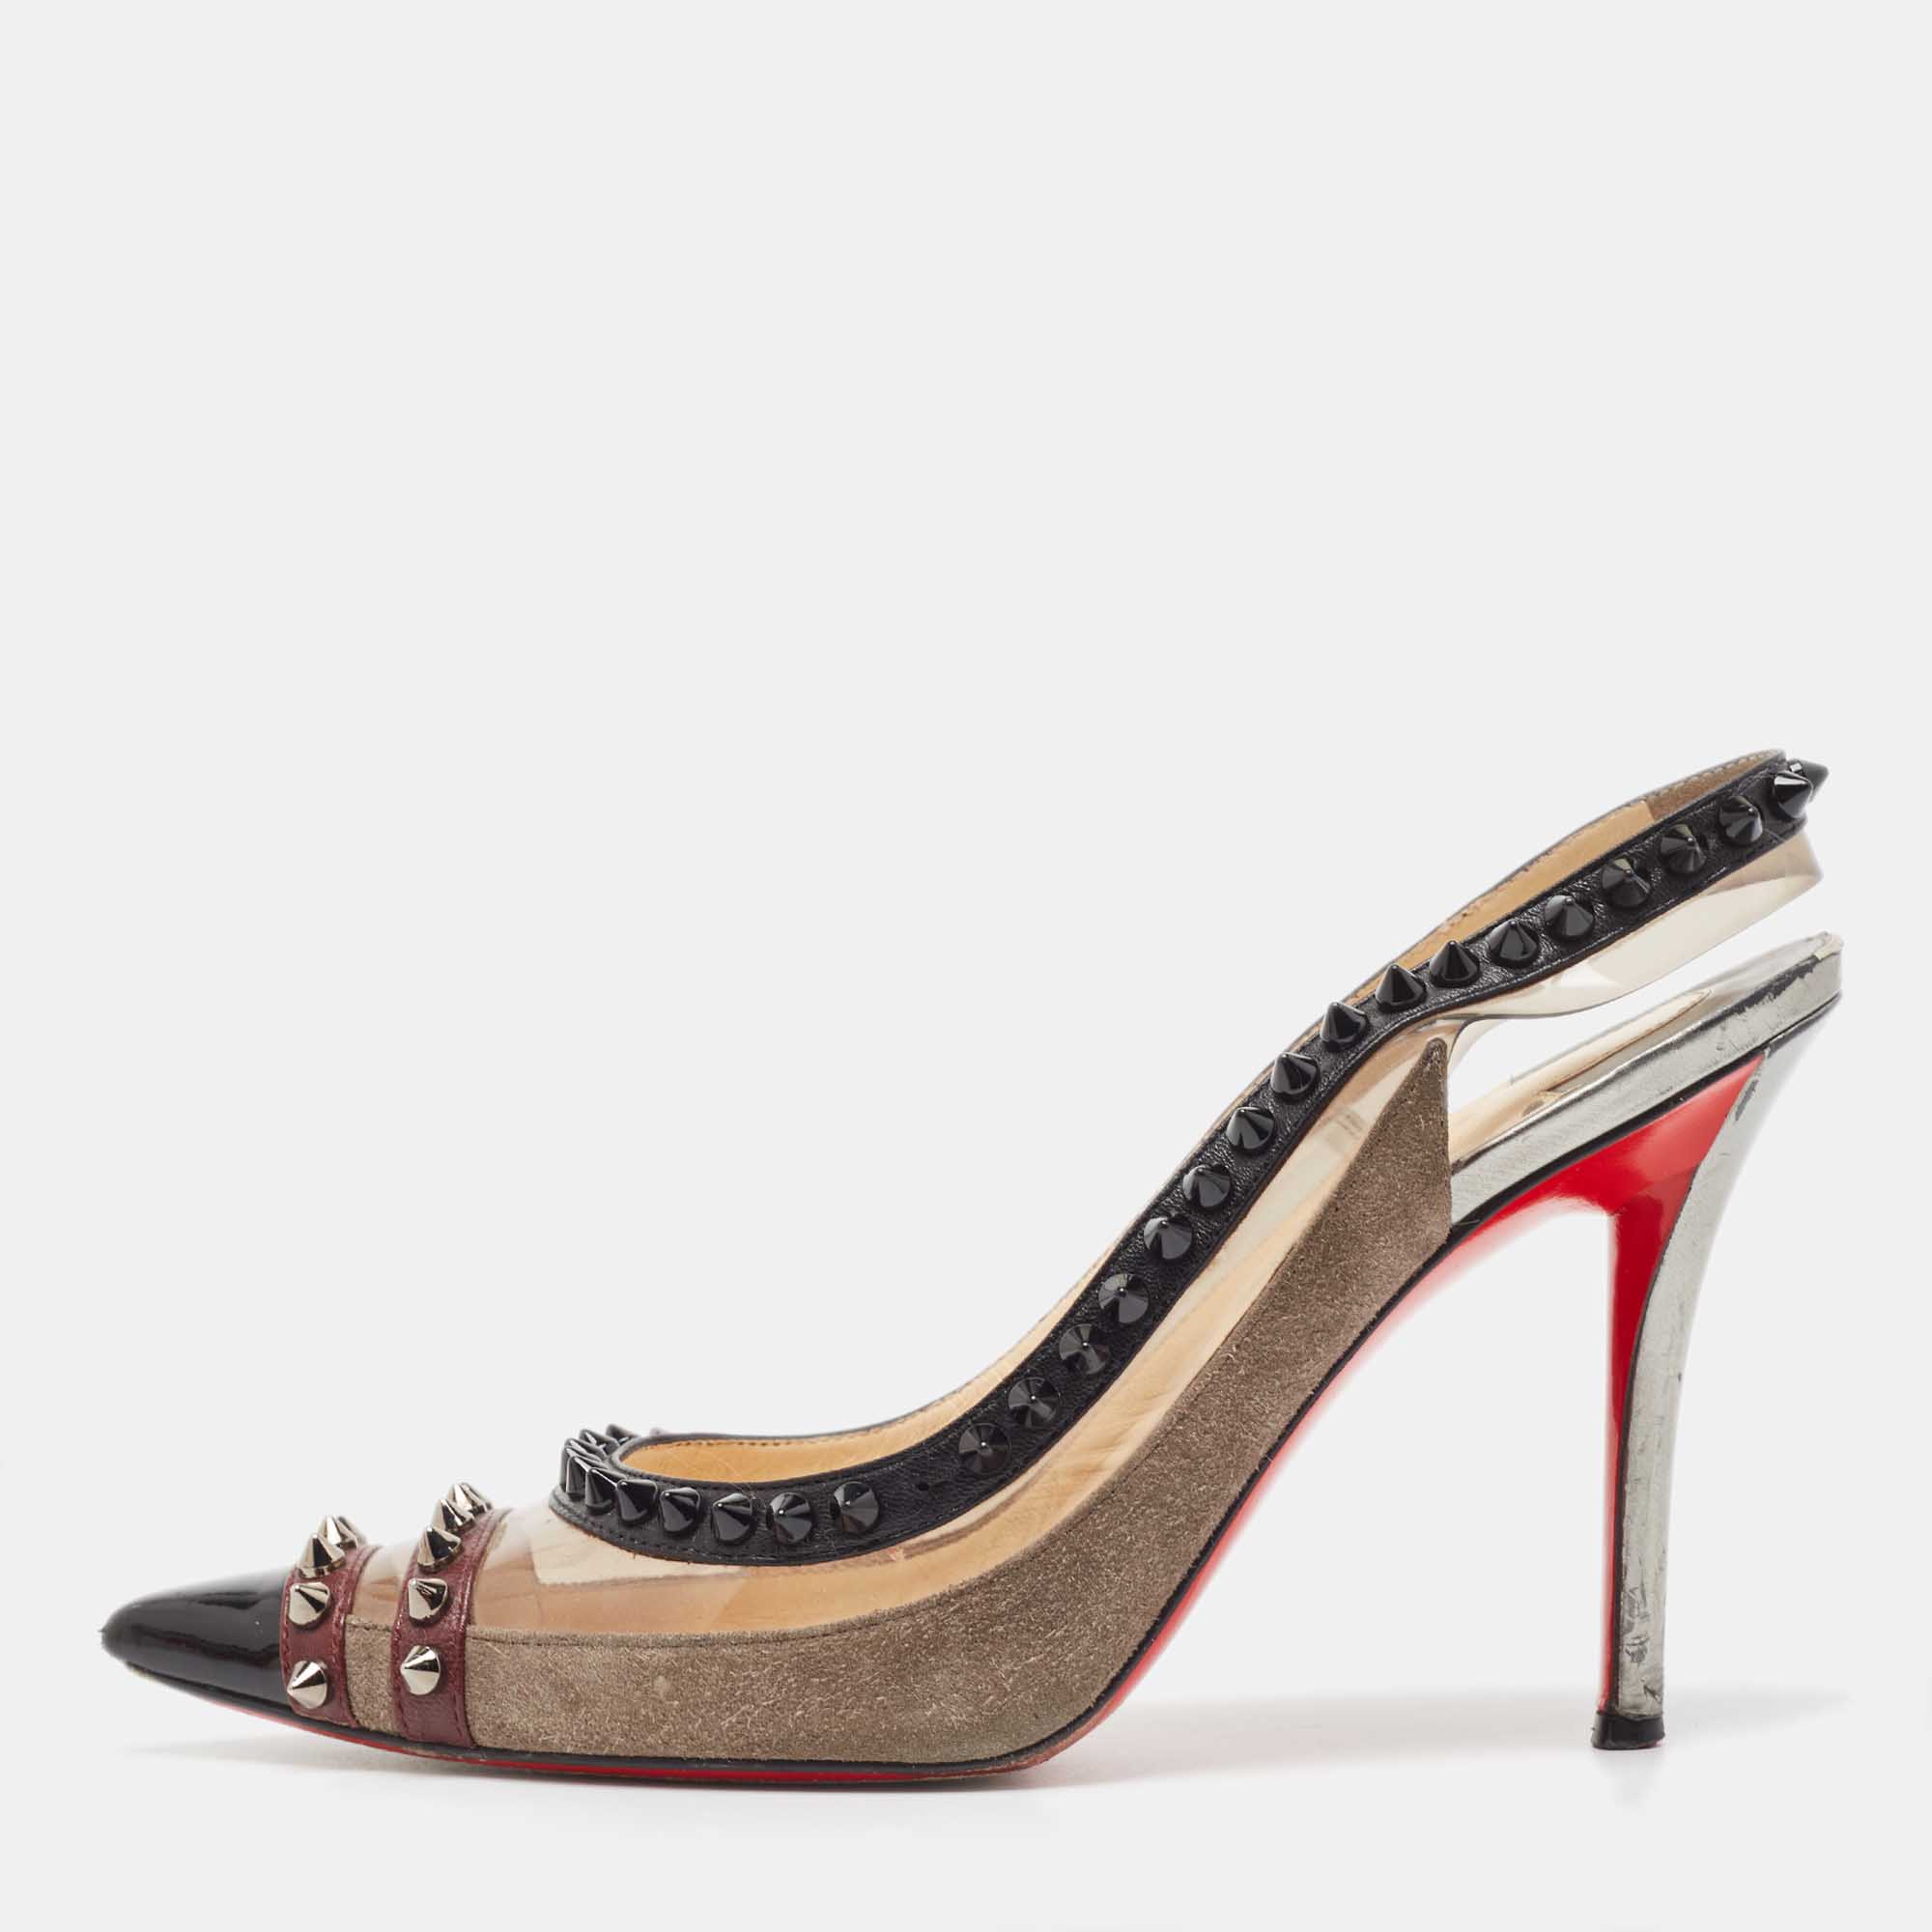 Christian Louboutin Tricolor Leather And PVC Spiked Slingback Pumps Size 37